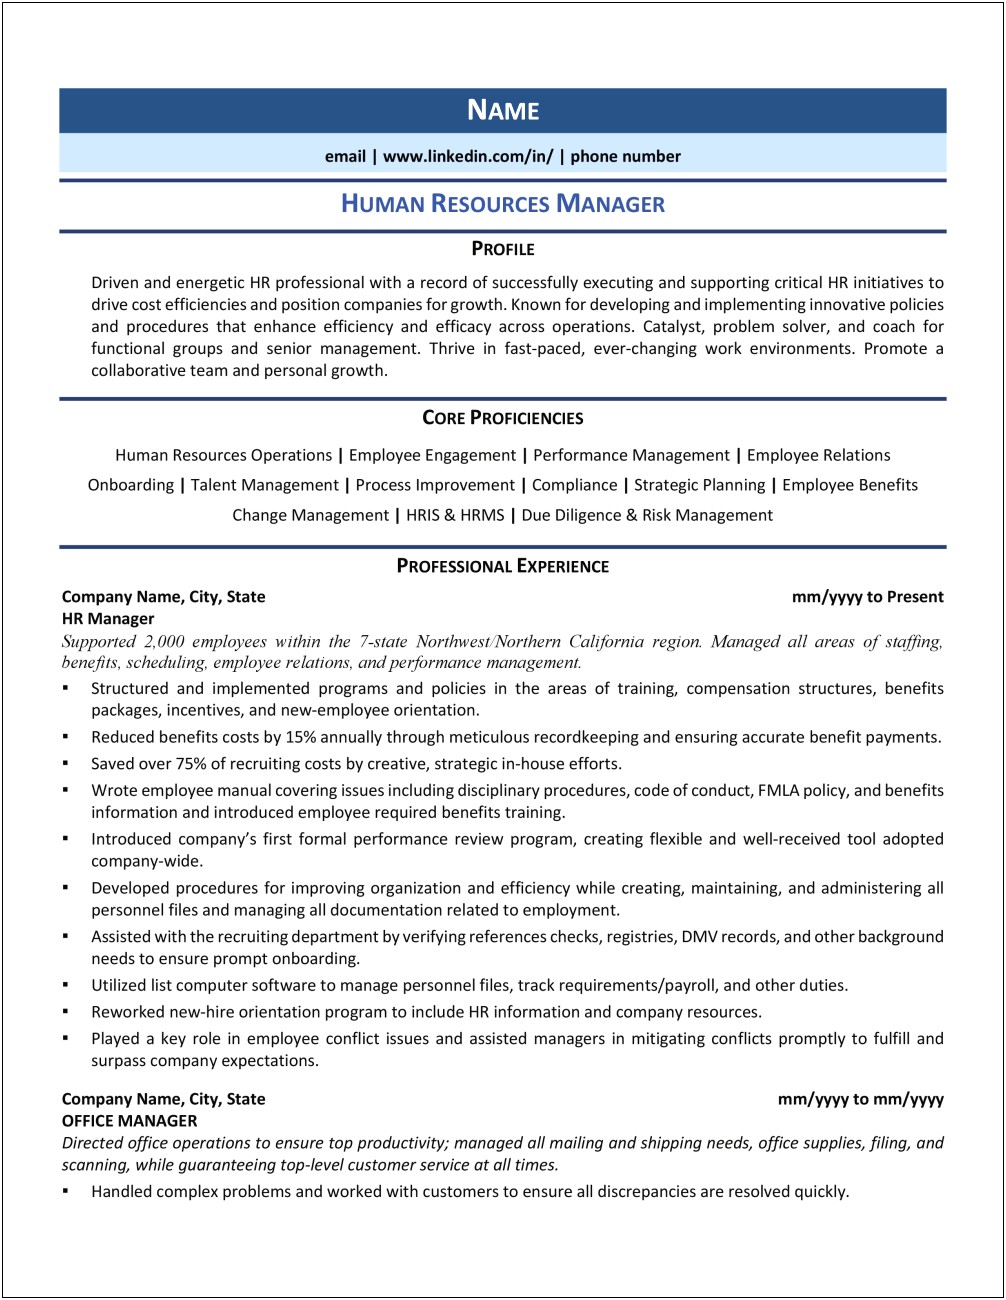 Resume Samples Human Resources Manager